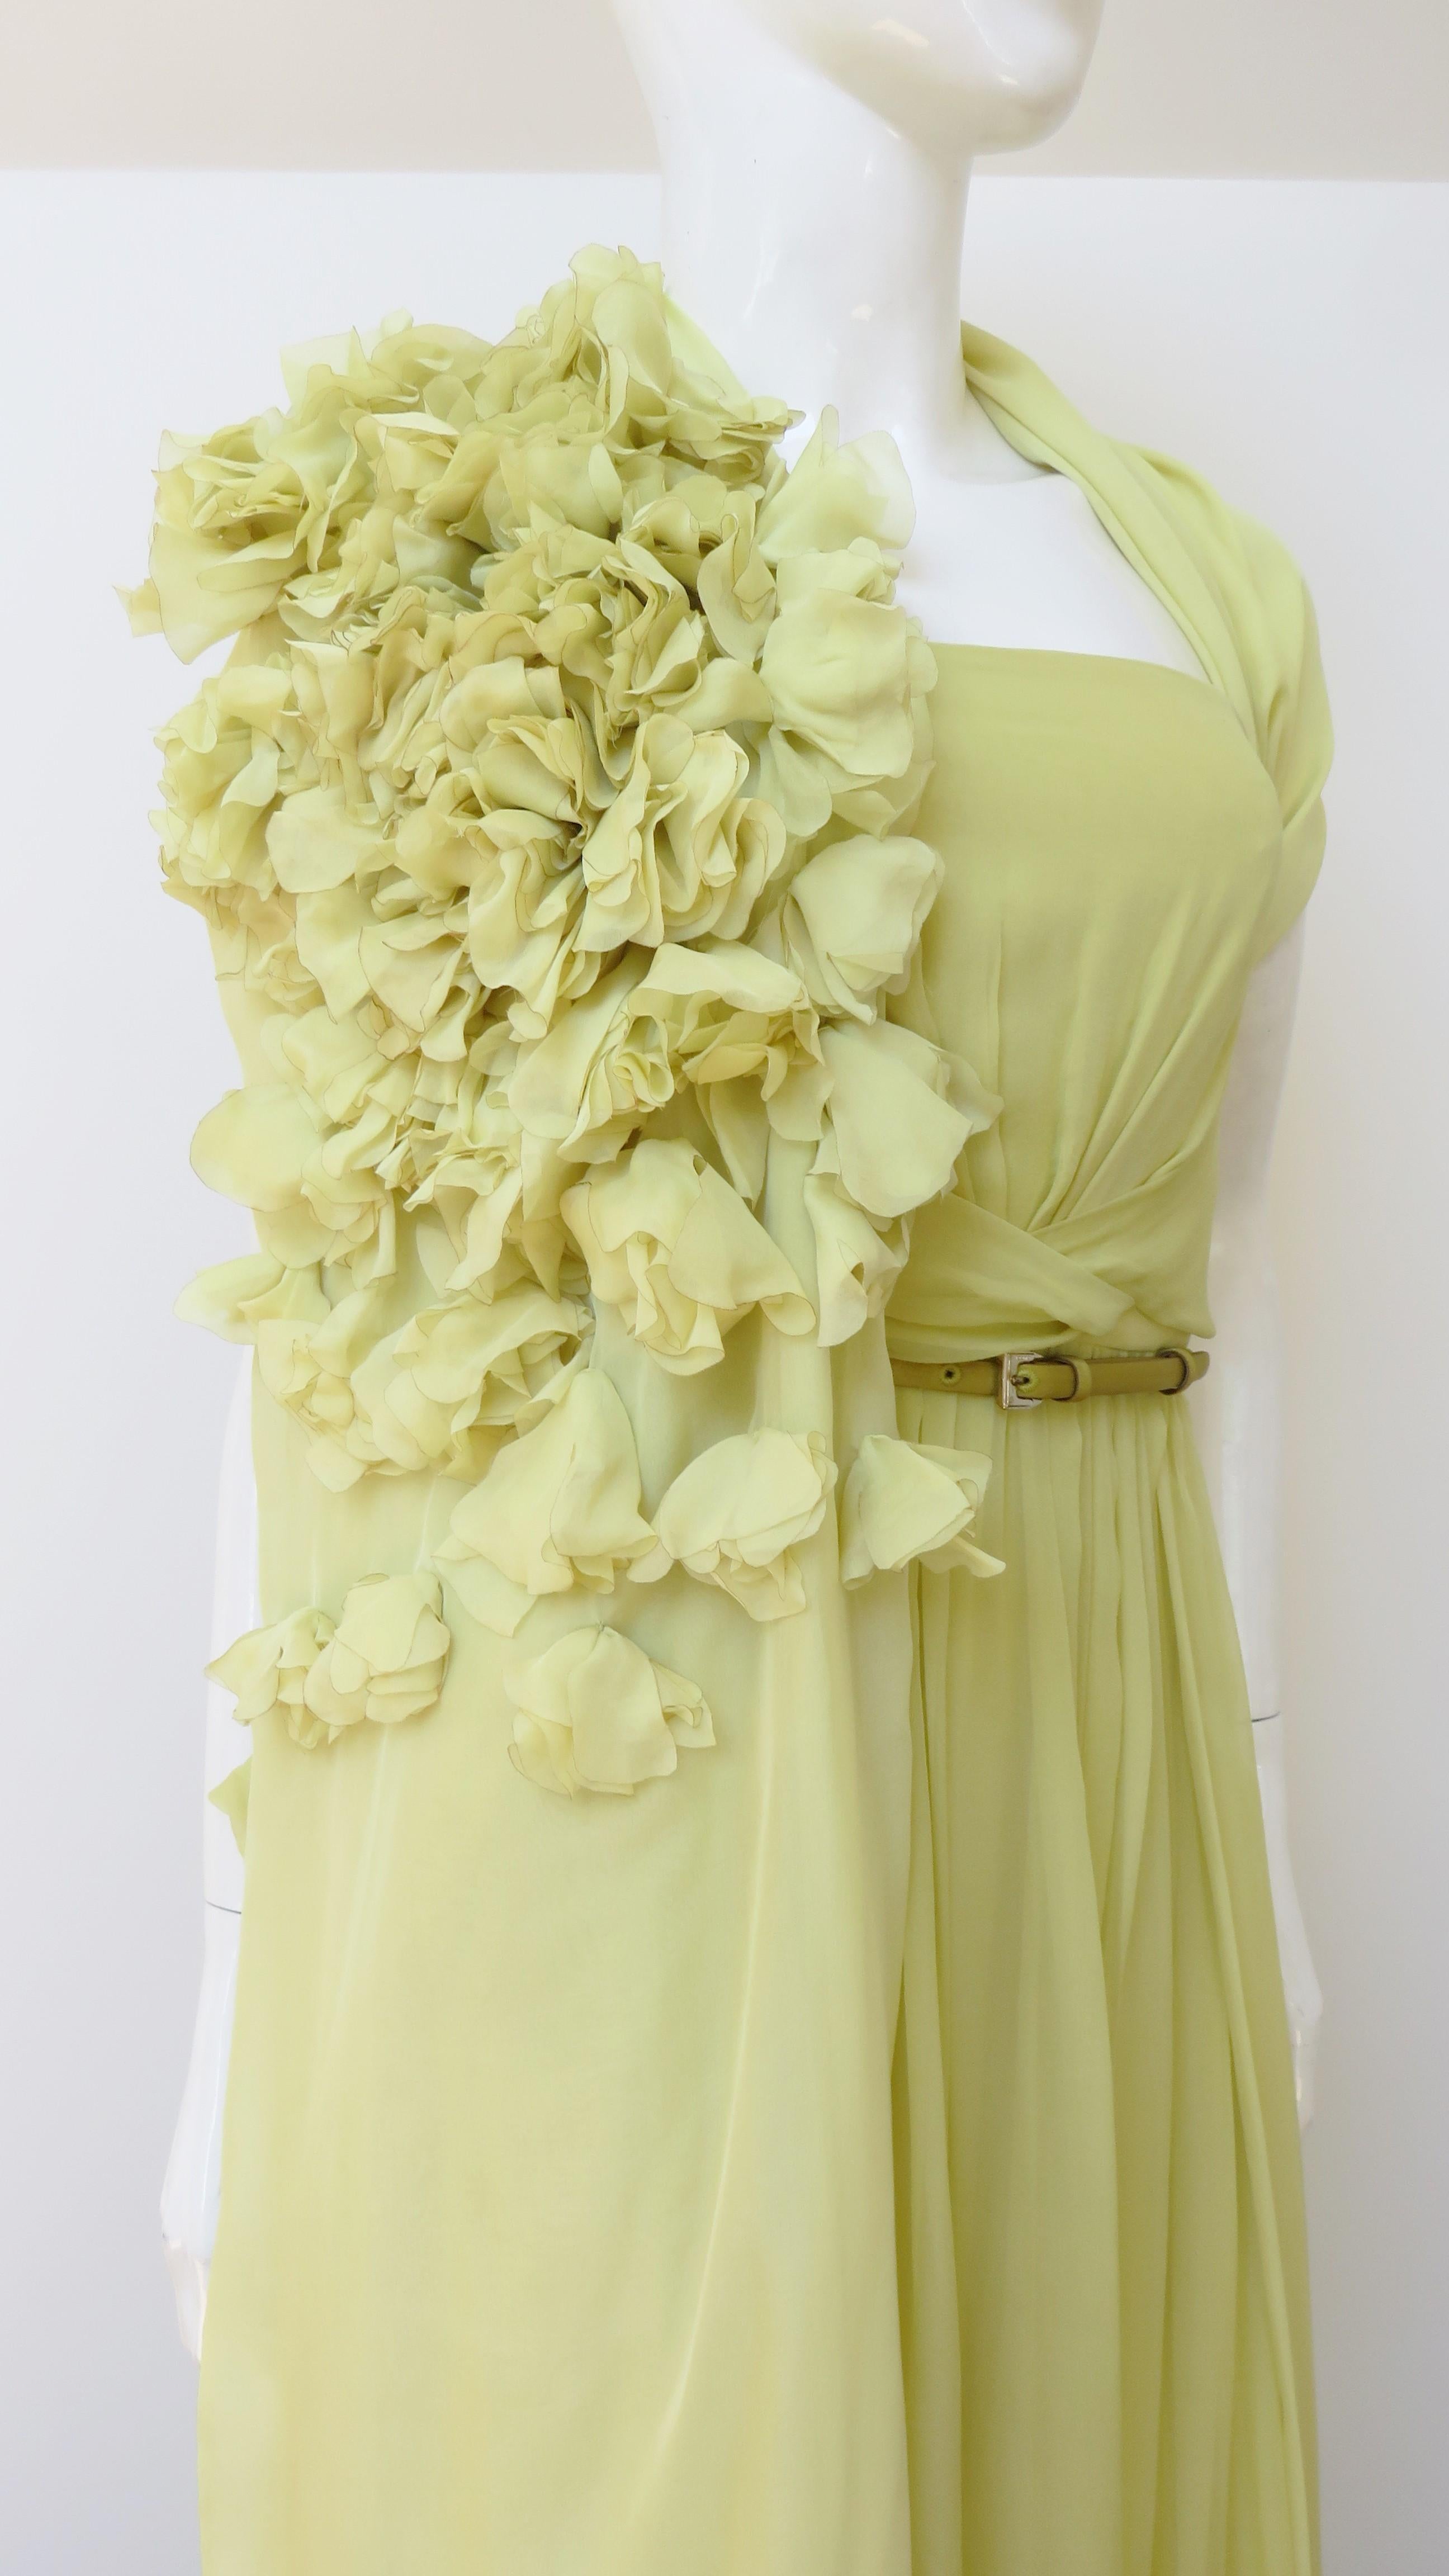 Gucci S/S 2011 Runway Strapless Gown, Flower Applique Wrap and Hot Pants For Sale 2